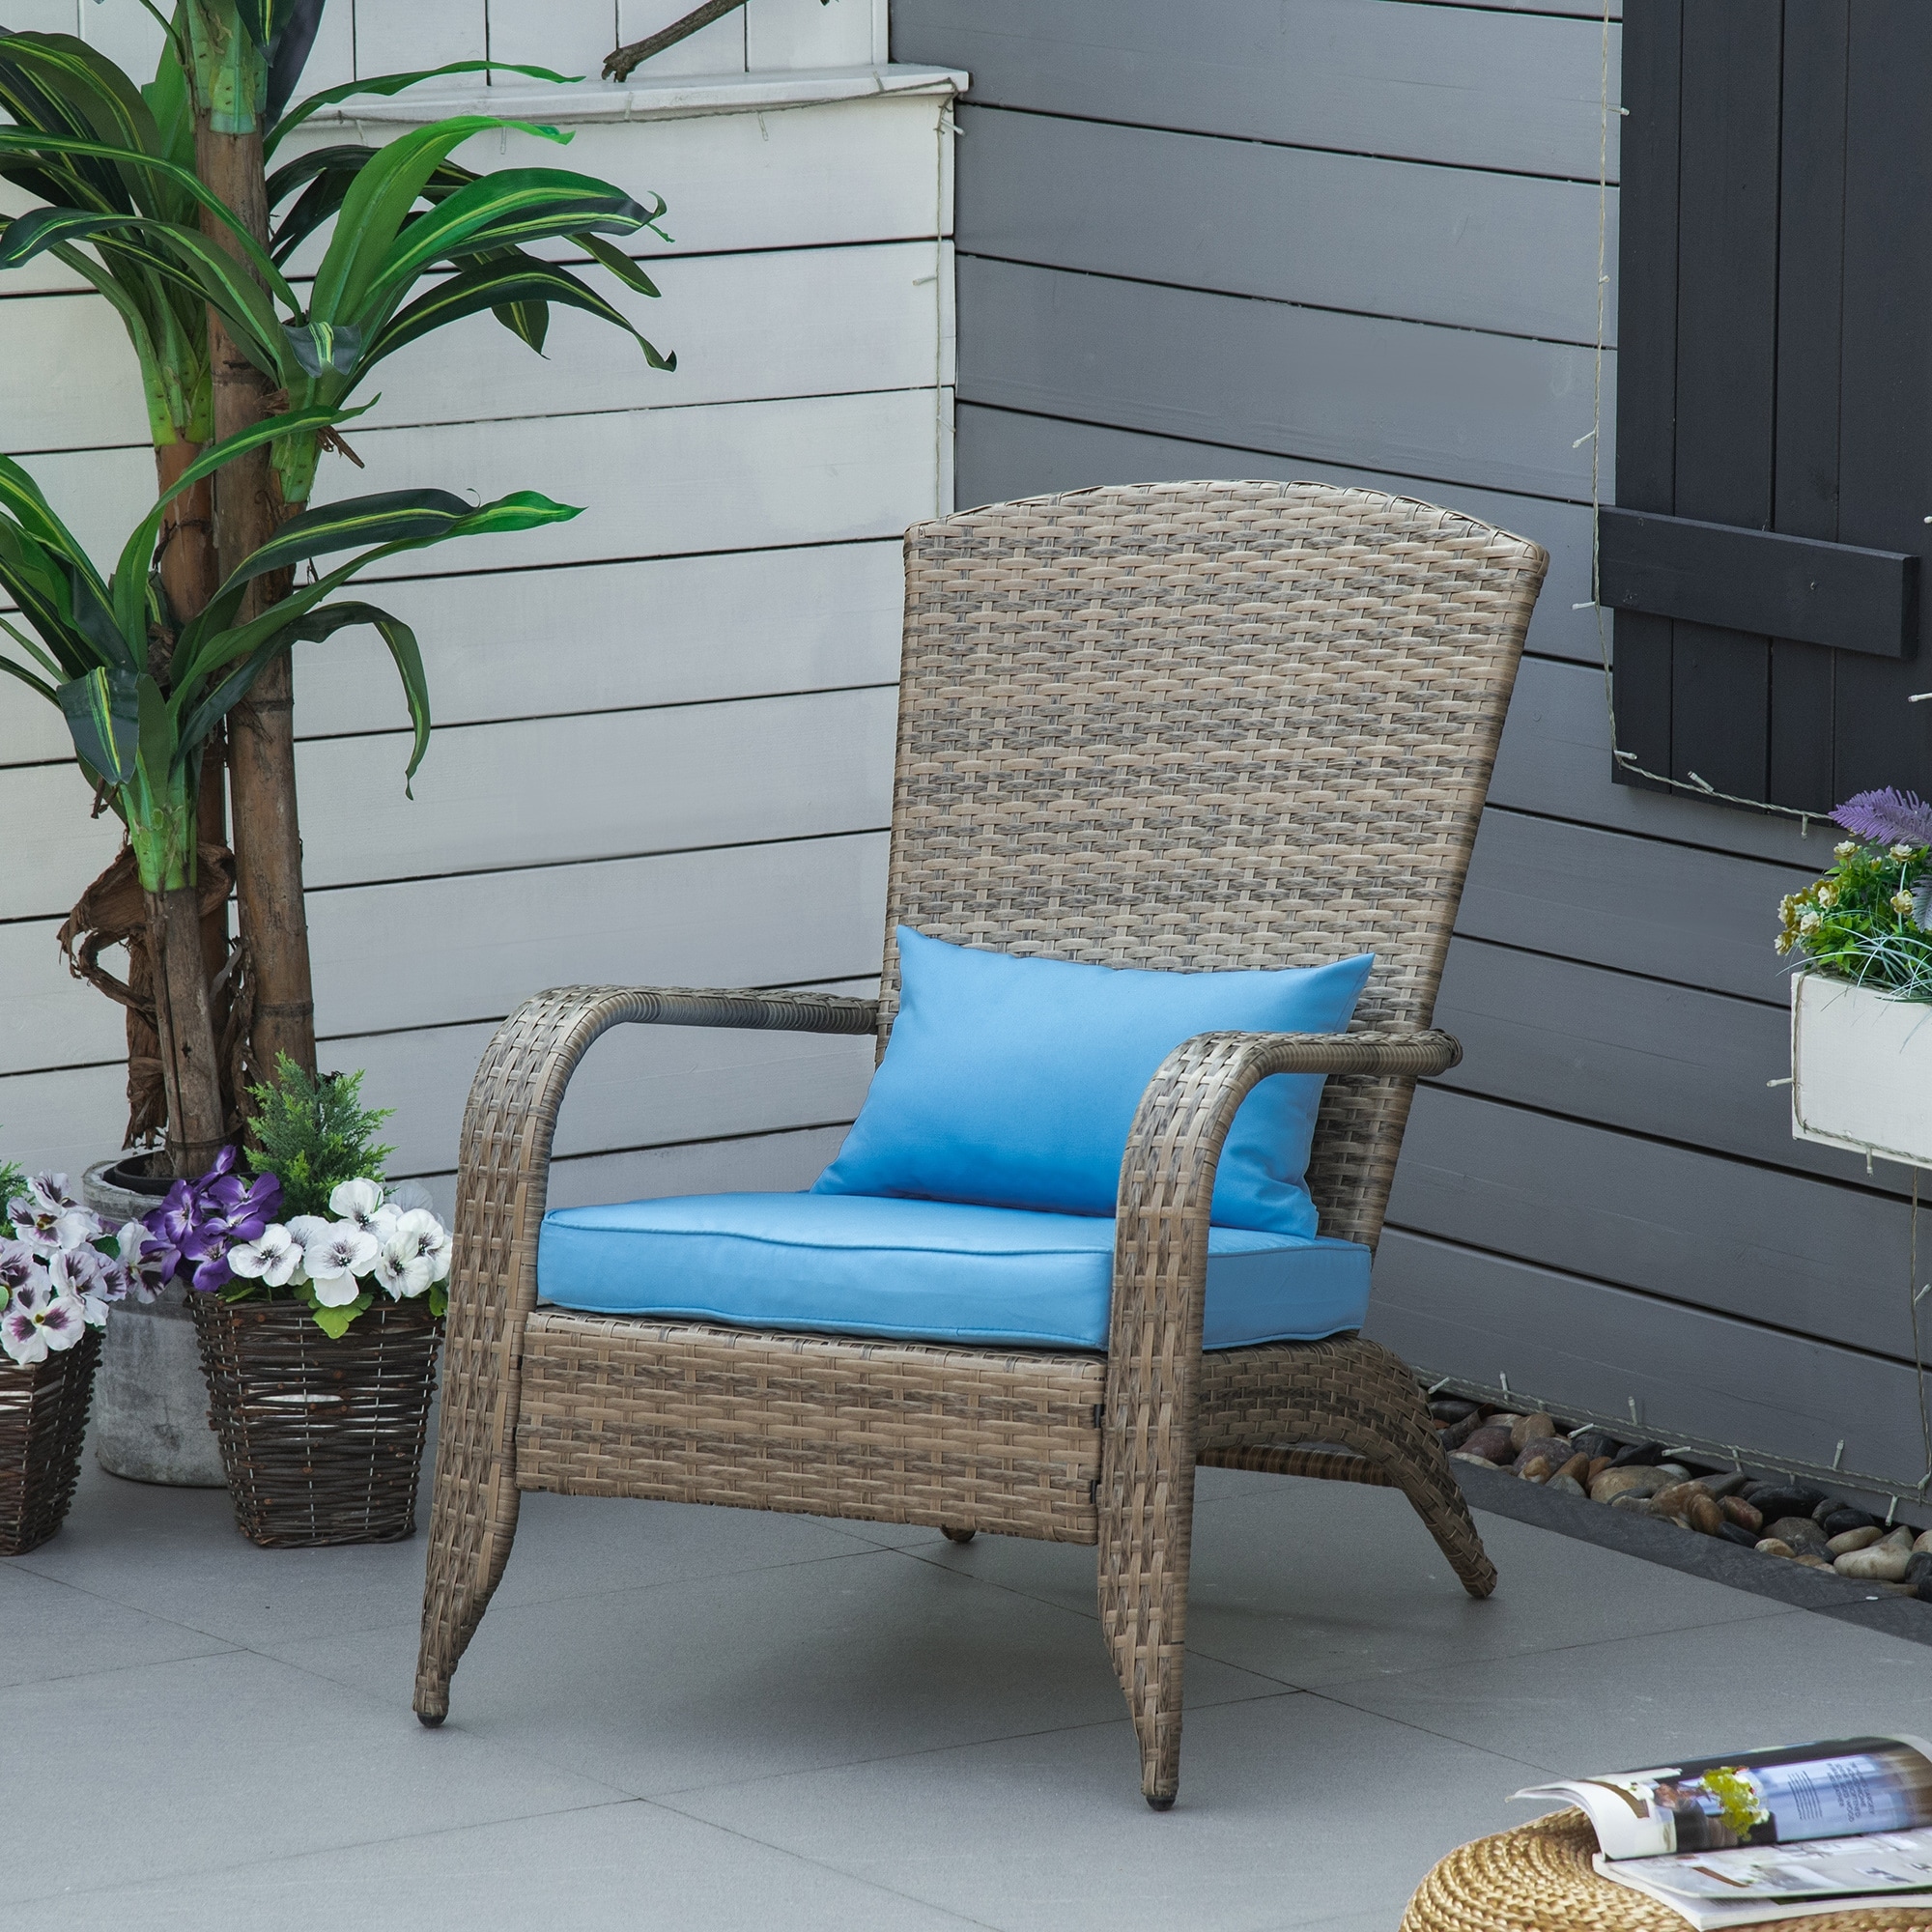 Outsunny Outdoor Classic Rattan Adirondack Chair With Cushion